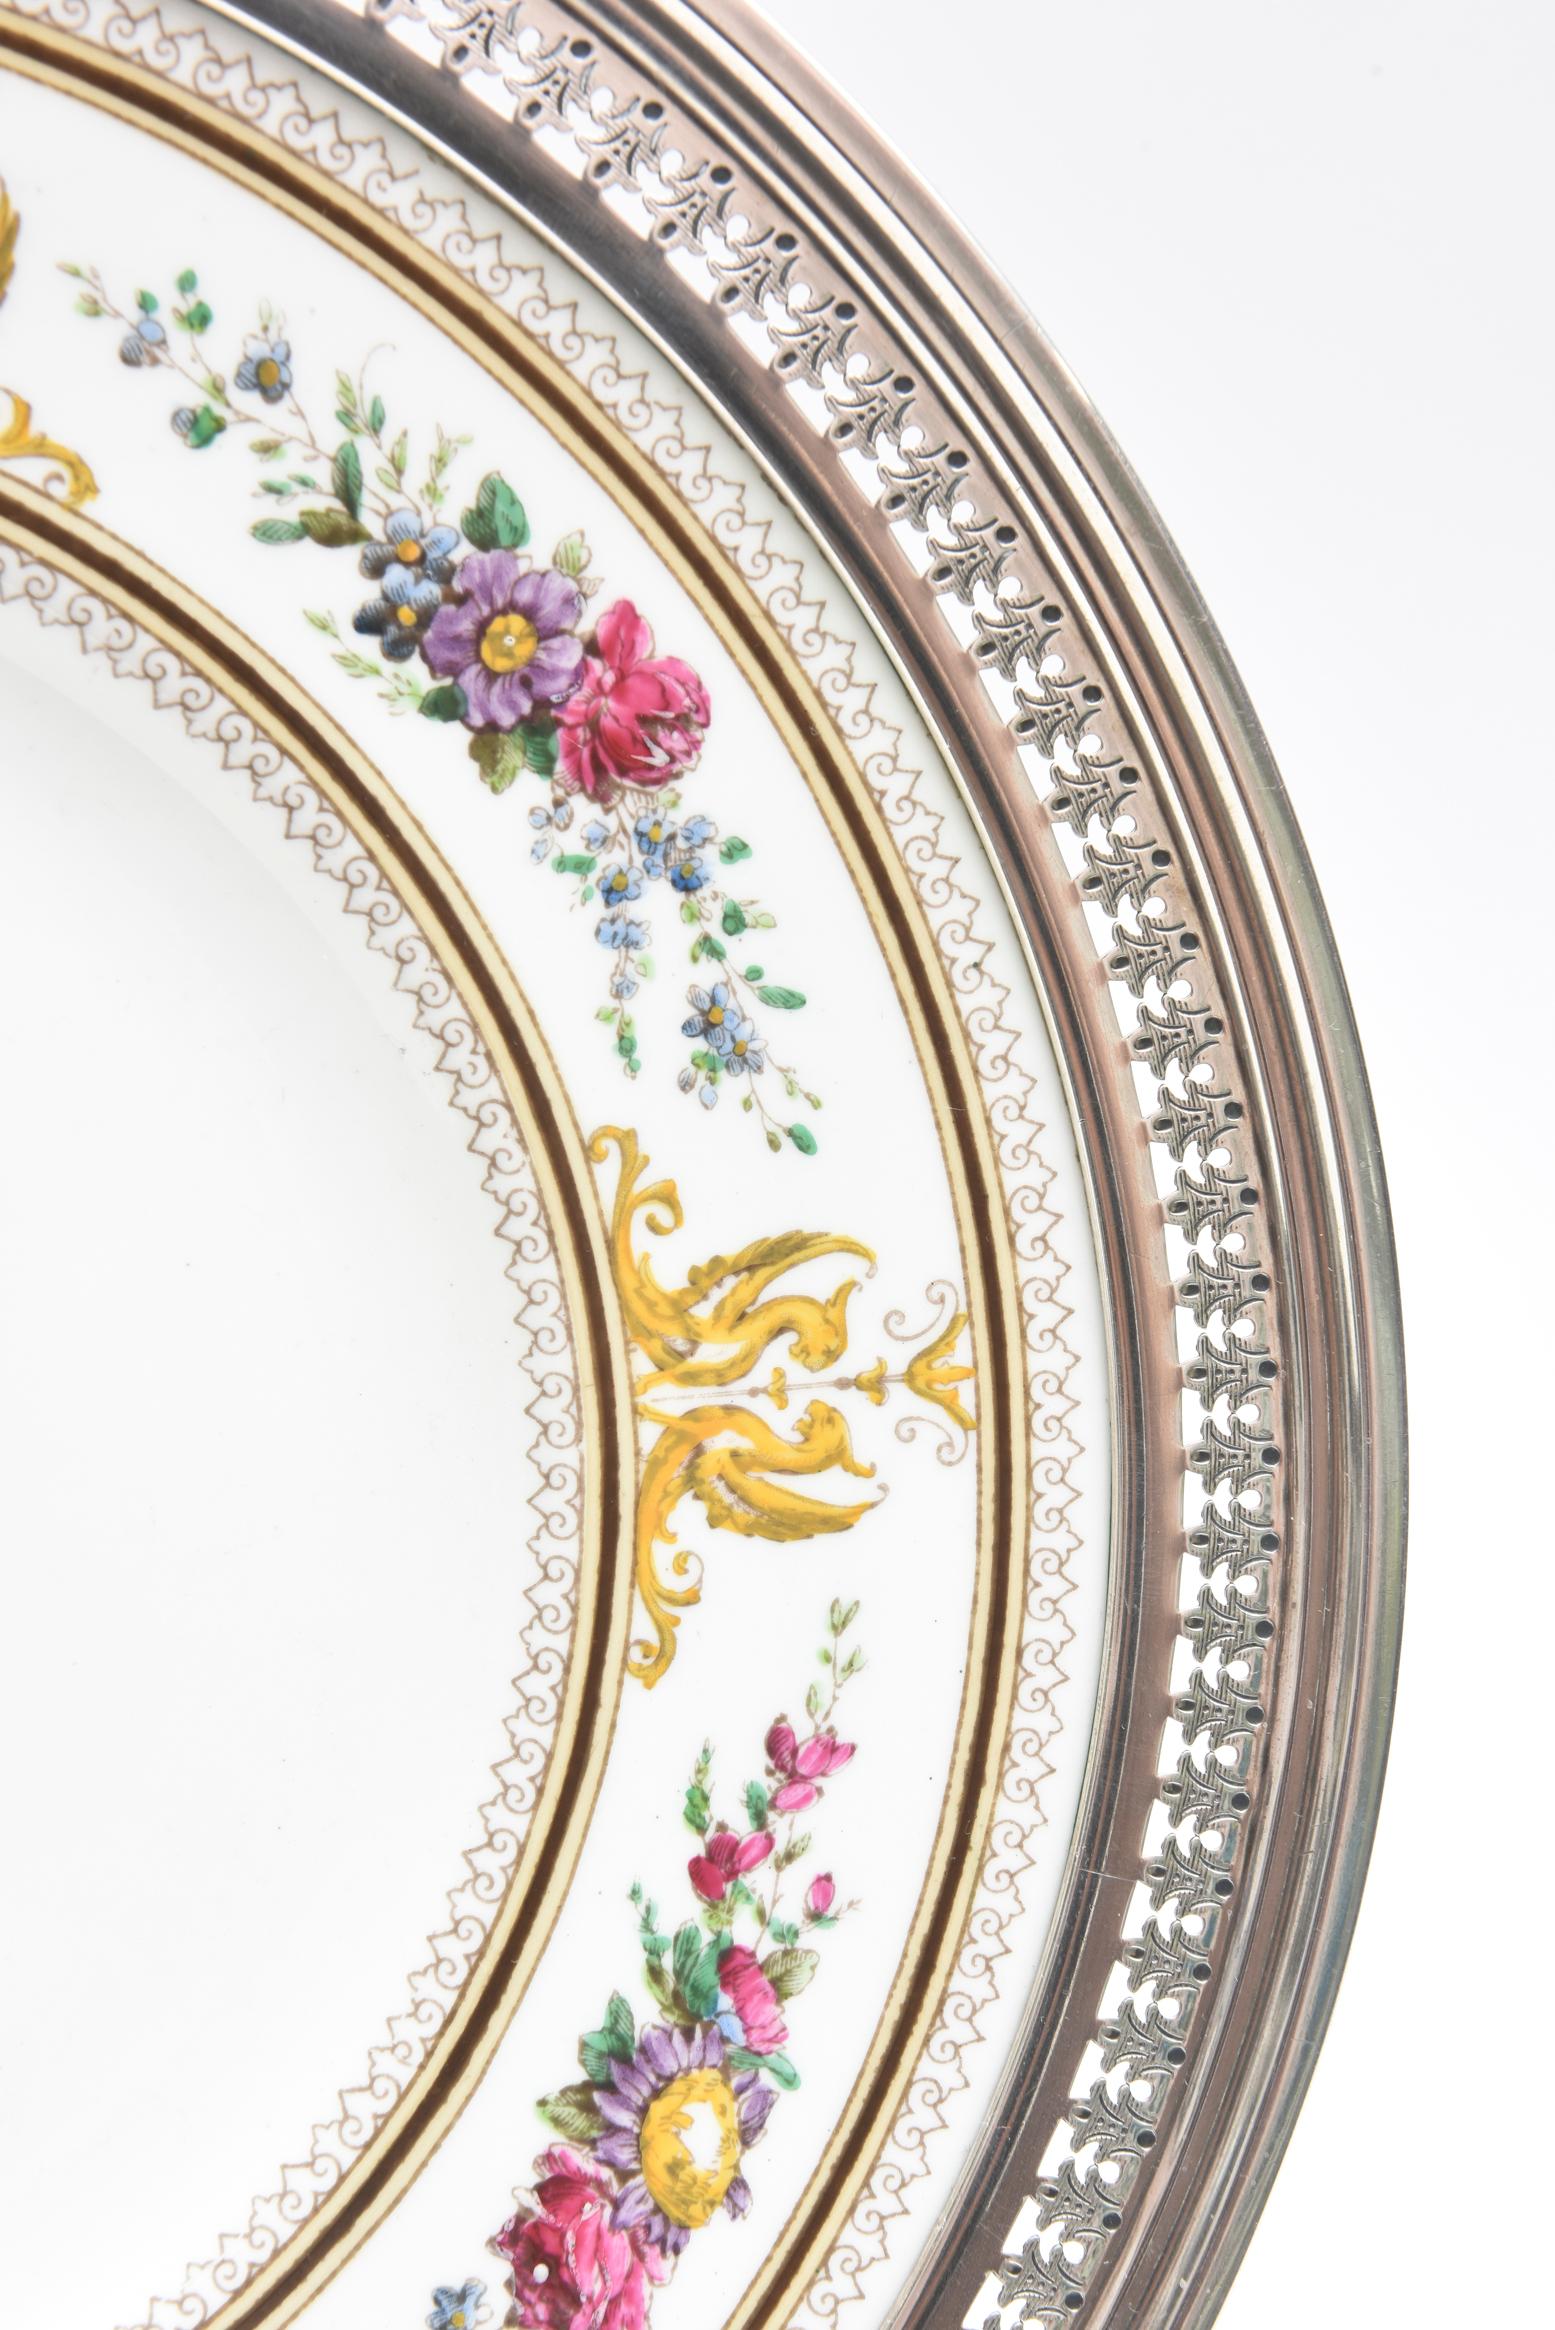 From Wedgwood England, we have a very handsome bone china set of 12 salad or dessert plates with a matching round serving platter. Fitted with a custom hand chased sterling silver collar and featuring one of Wedgwood's Classic enamel pattern